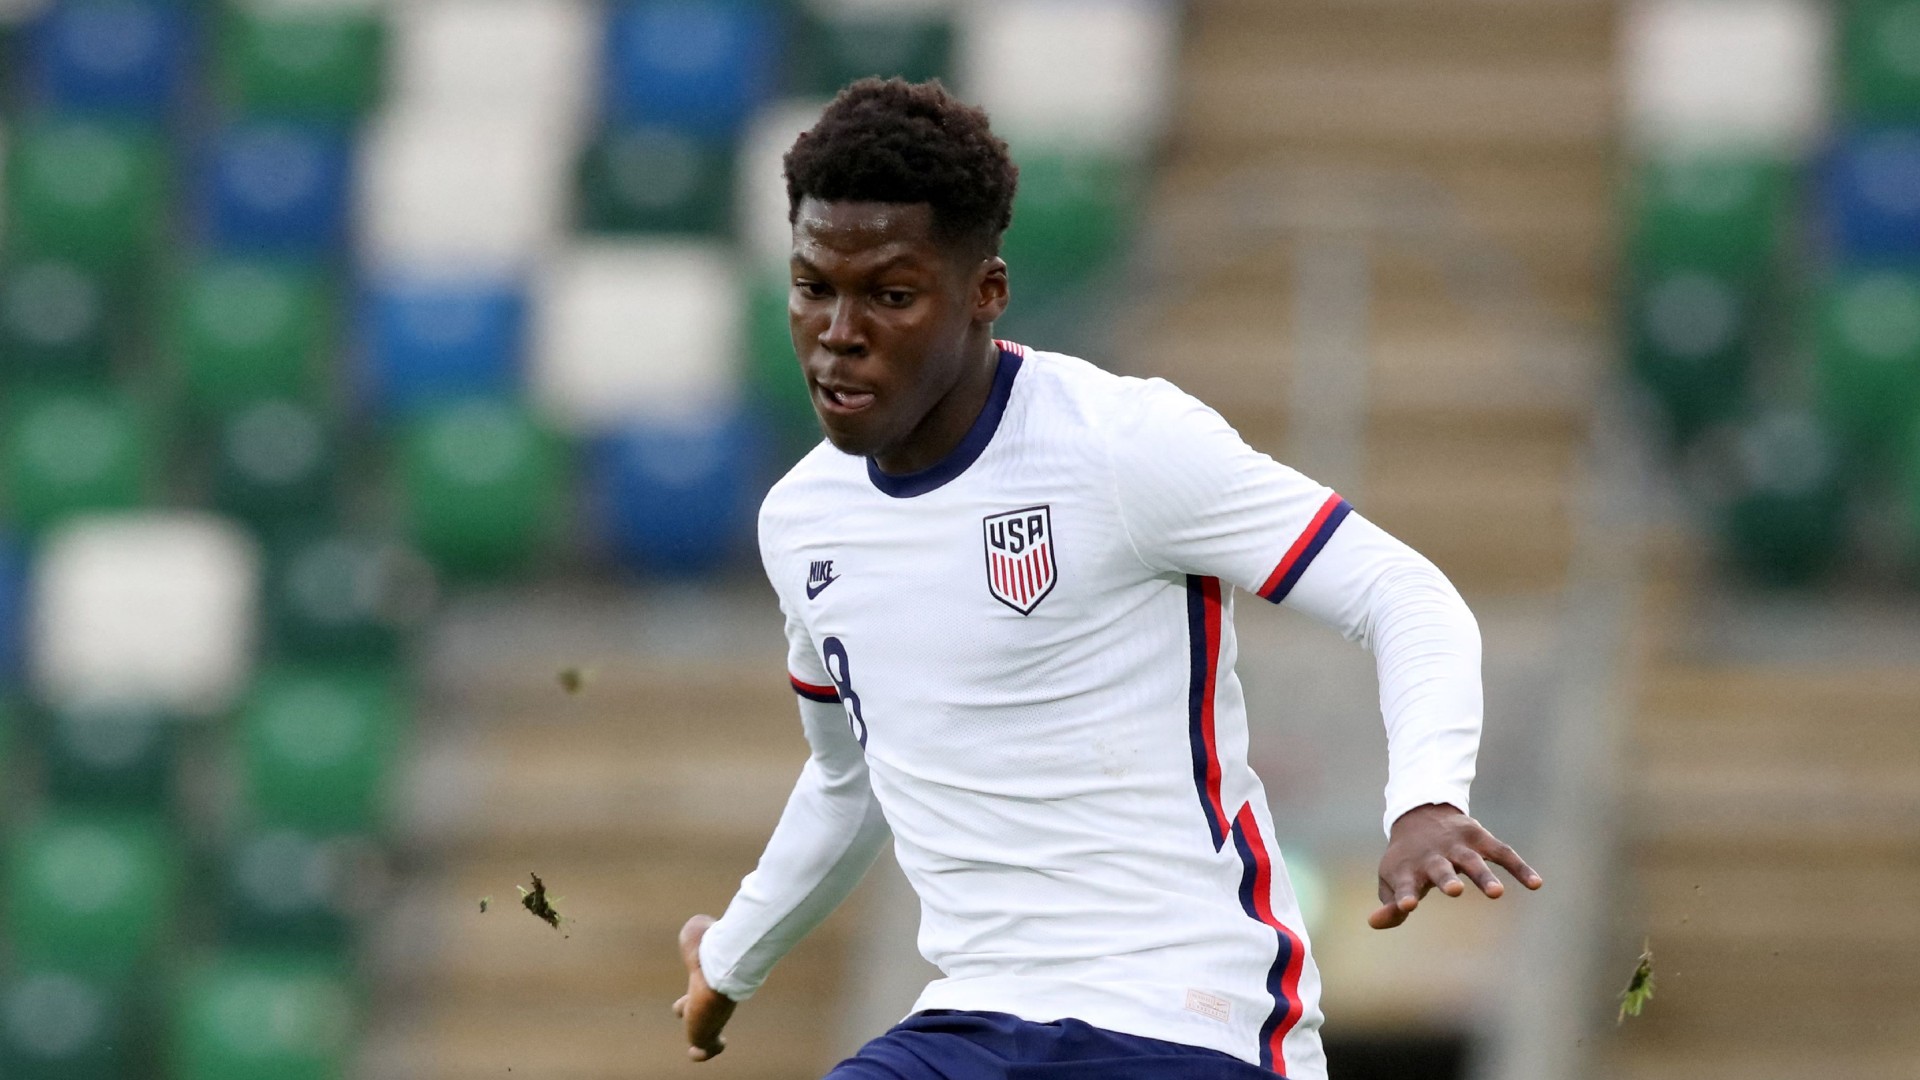 USMNT boss Berhalter explains Musah's Nations League omission and reveals Steffen injury diagnosis